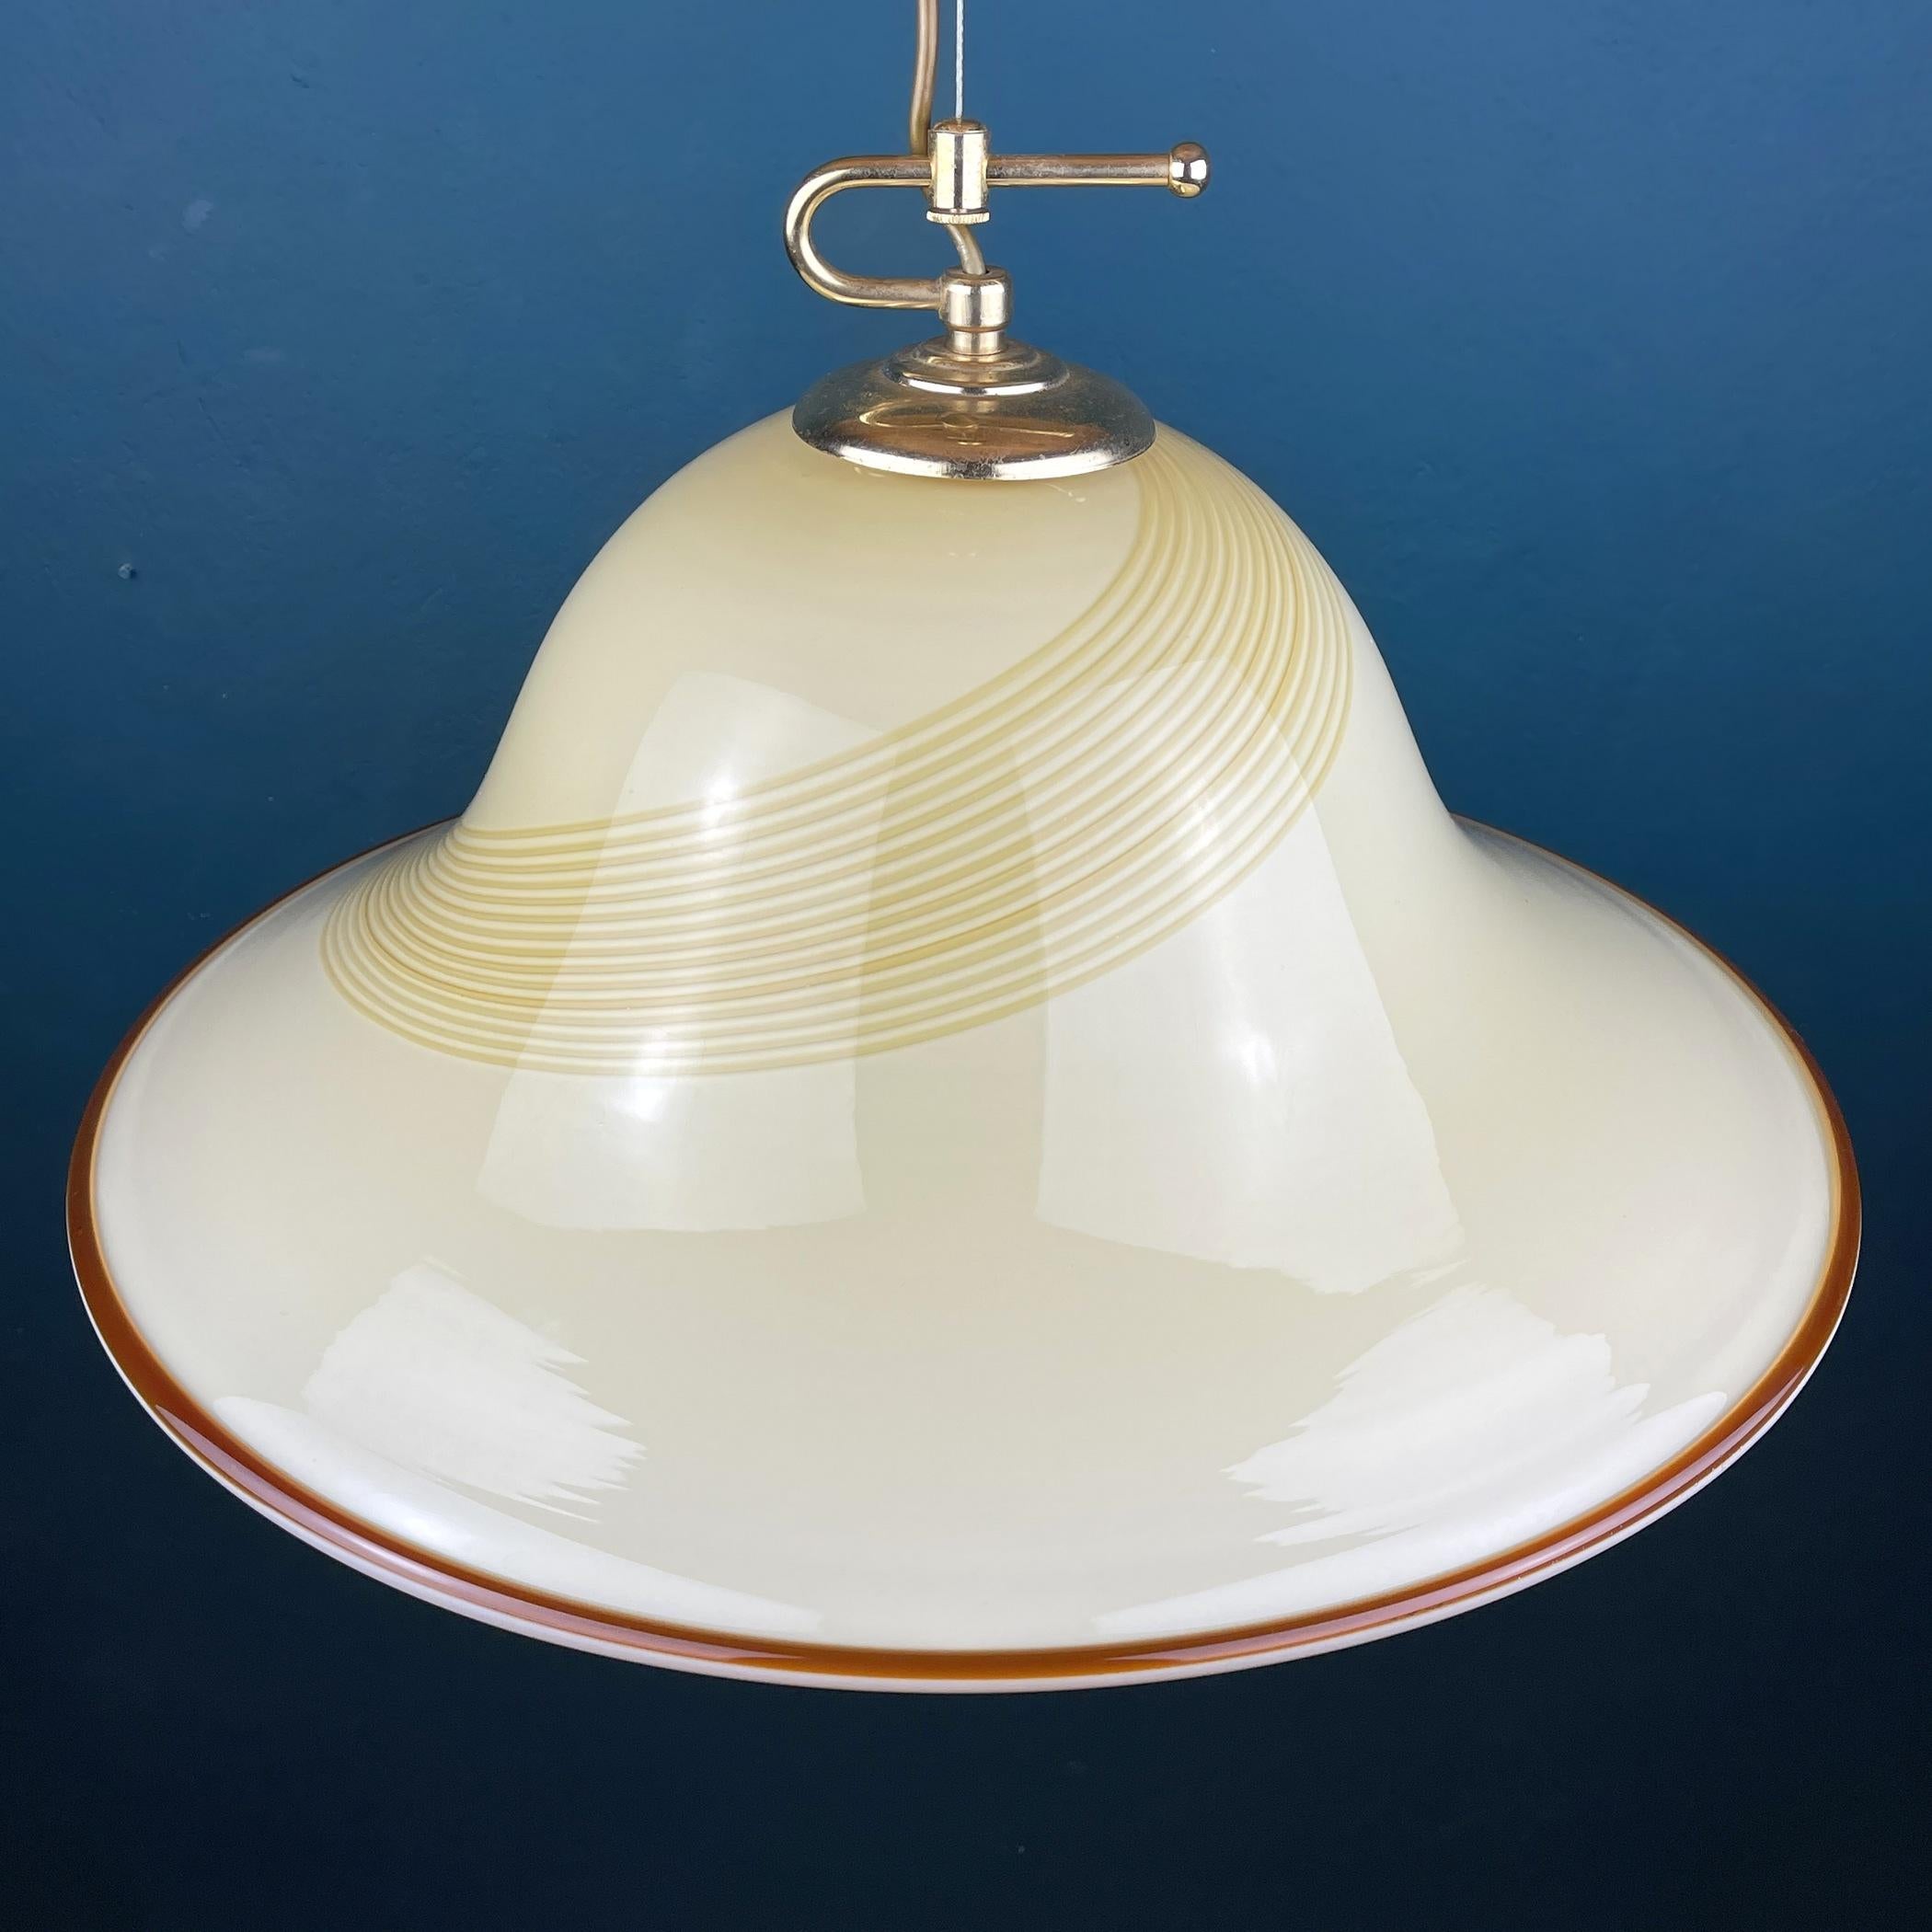 Vintage Beige Murano Glass Pendant Lamp by De Majo, Italy, 1970s For Sale 2